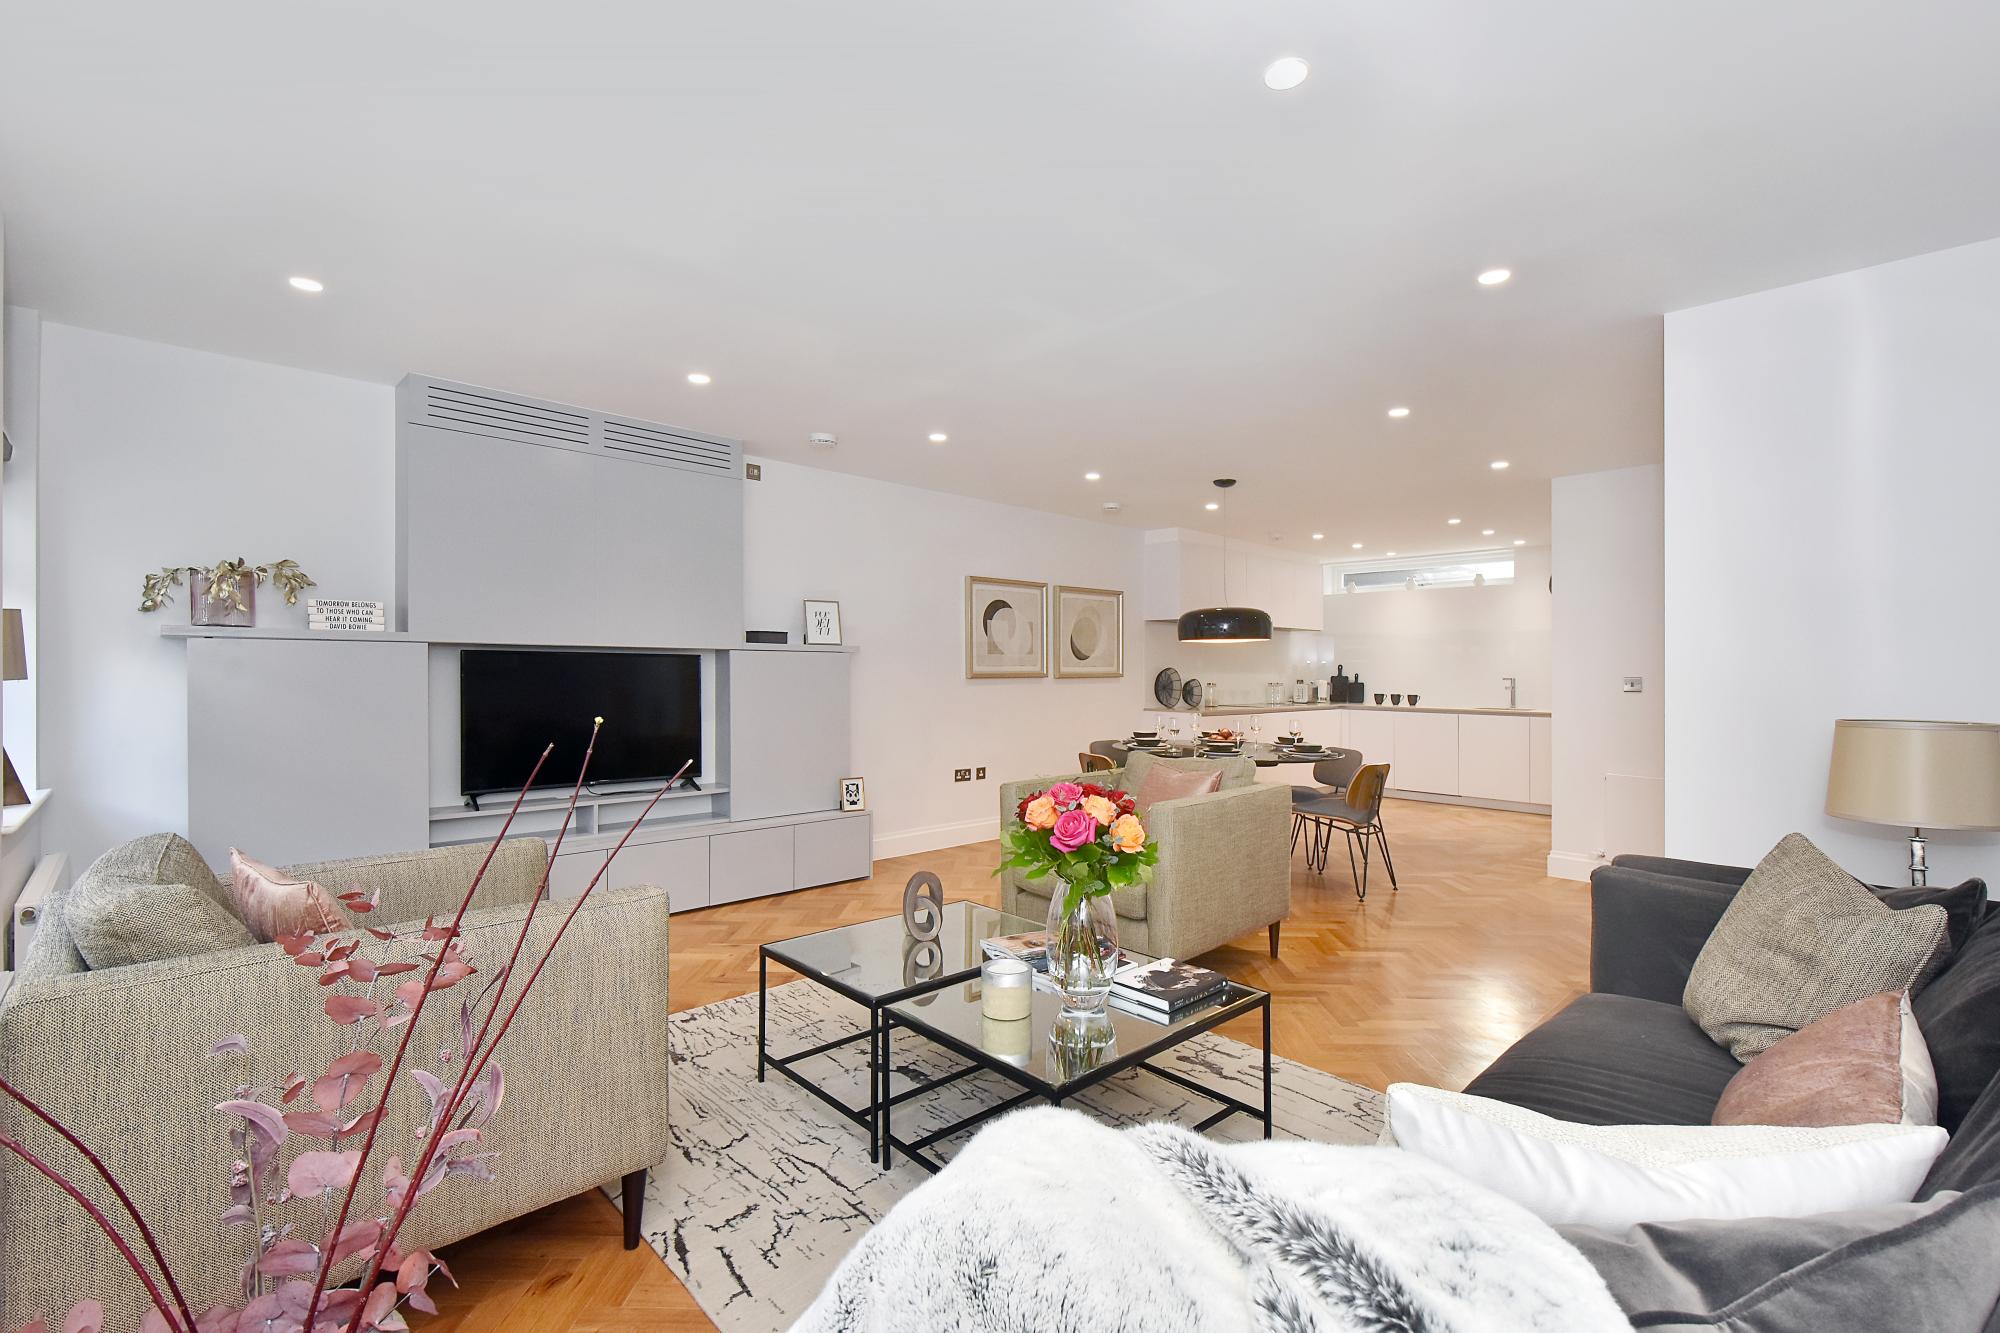 Property Image 2 - Outstanding Smart Apartment close to Bond Street